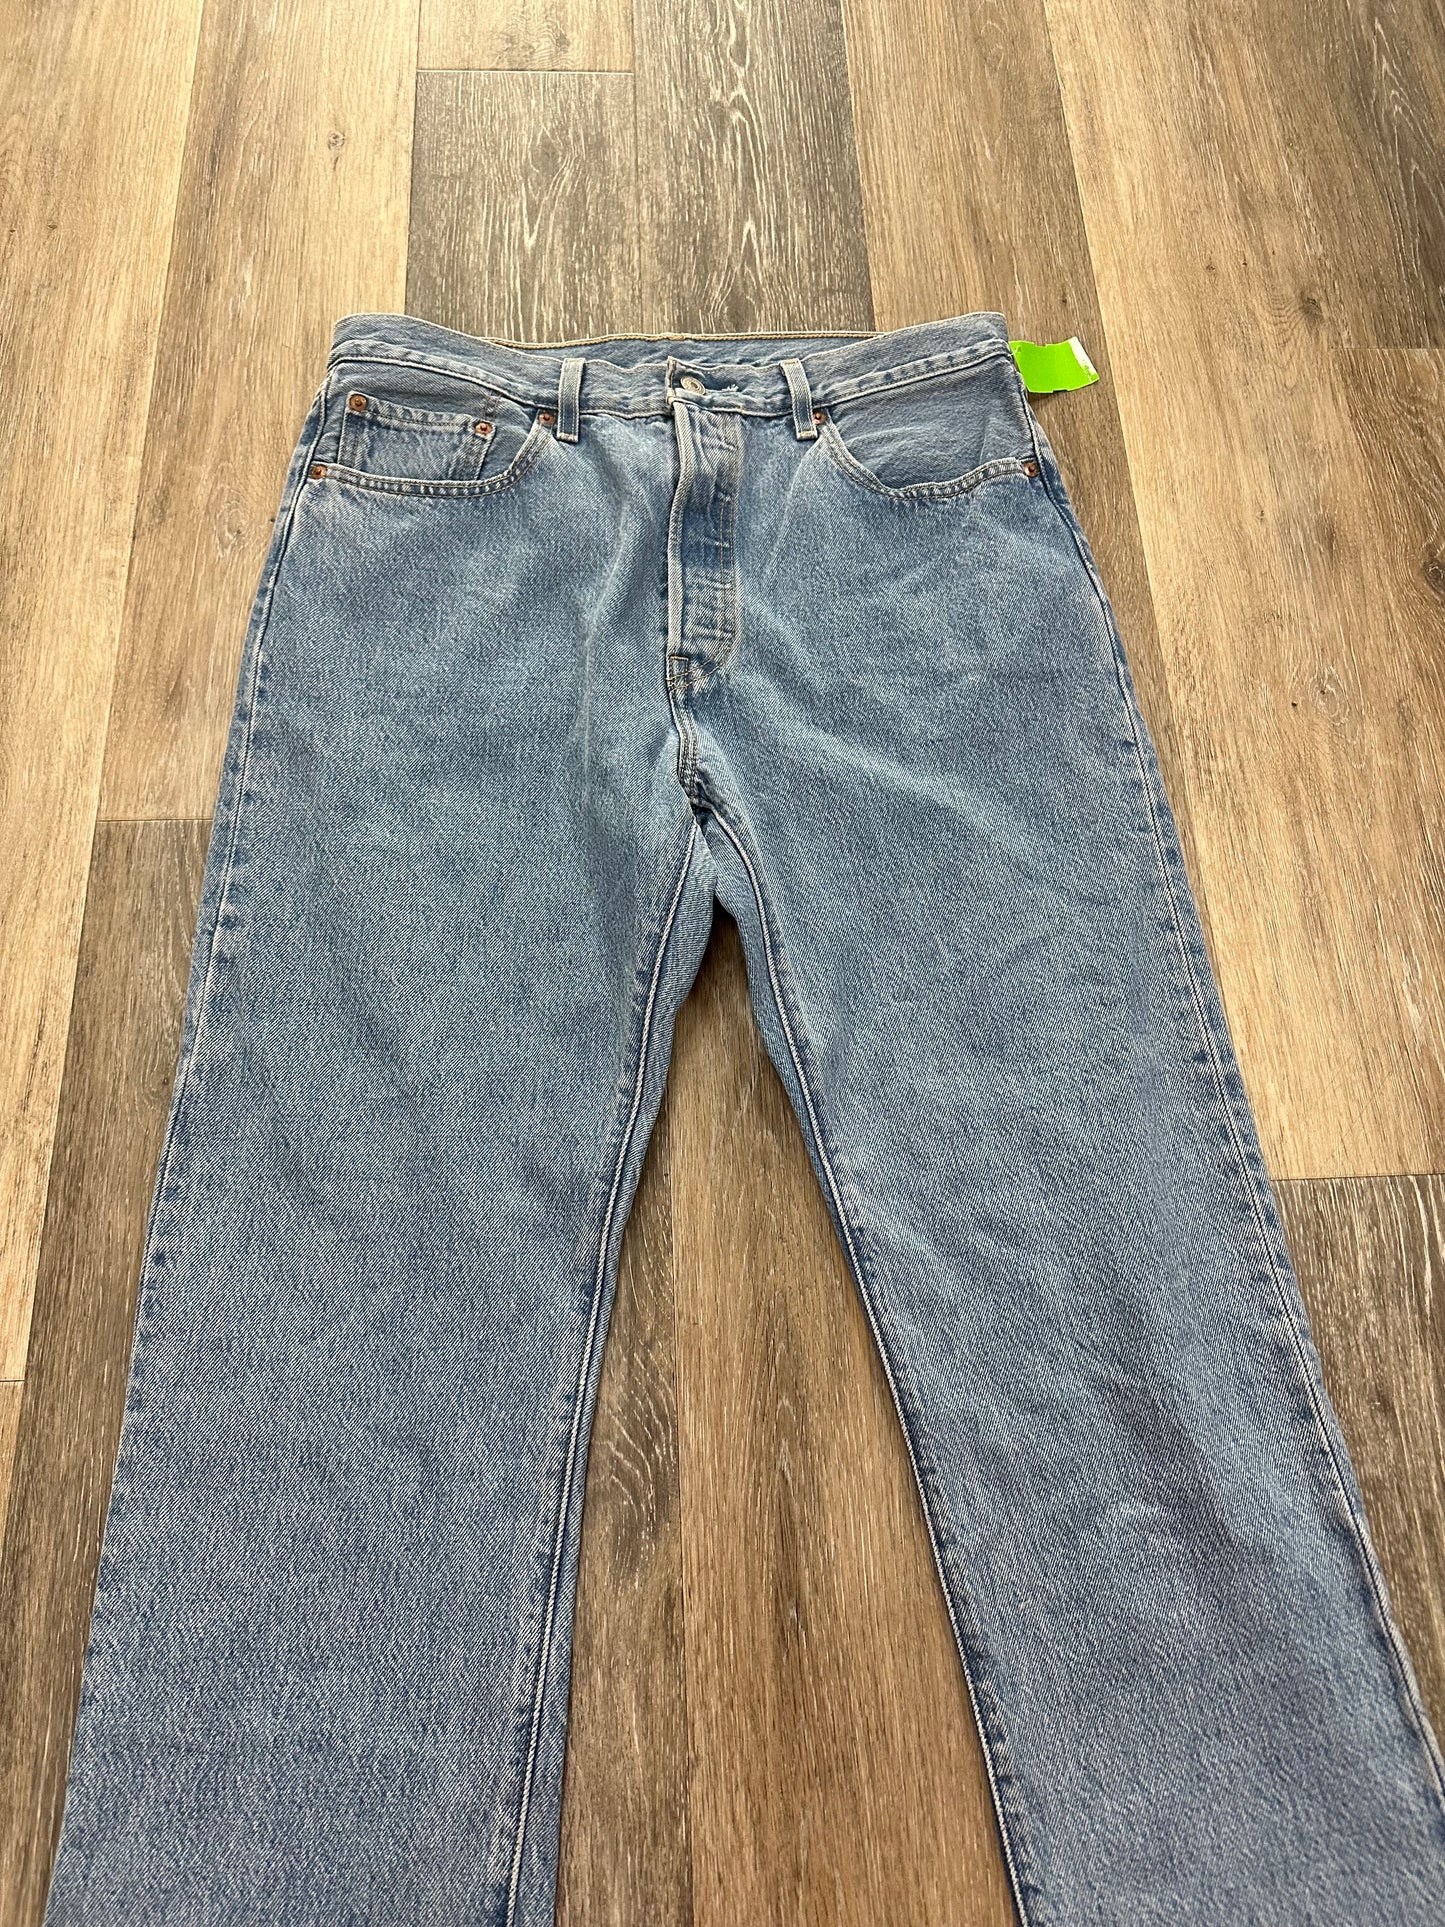 Jeans Boot Cut By Levis  Size: 14